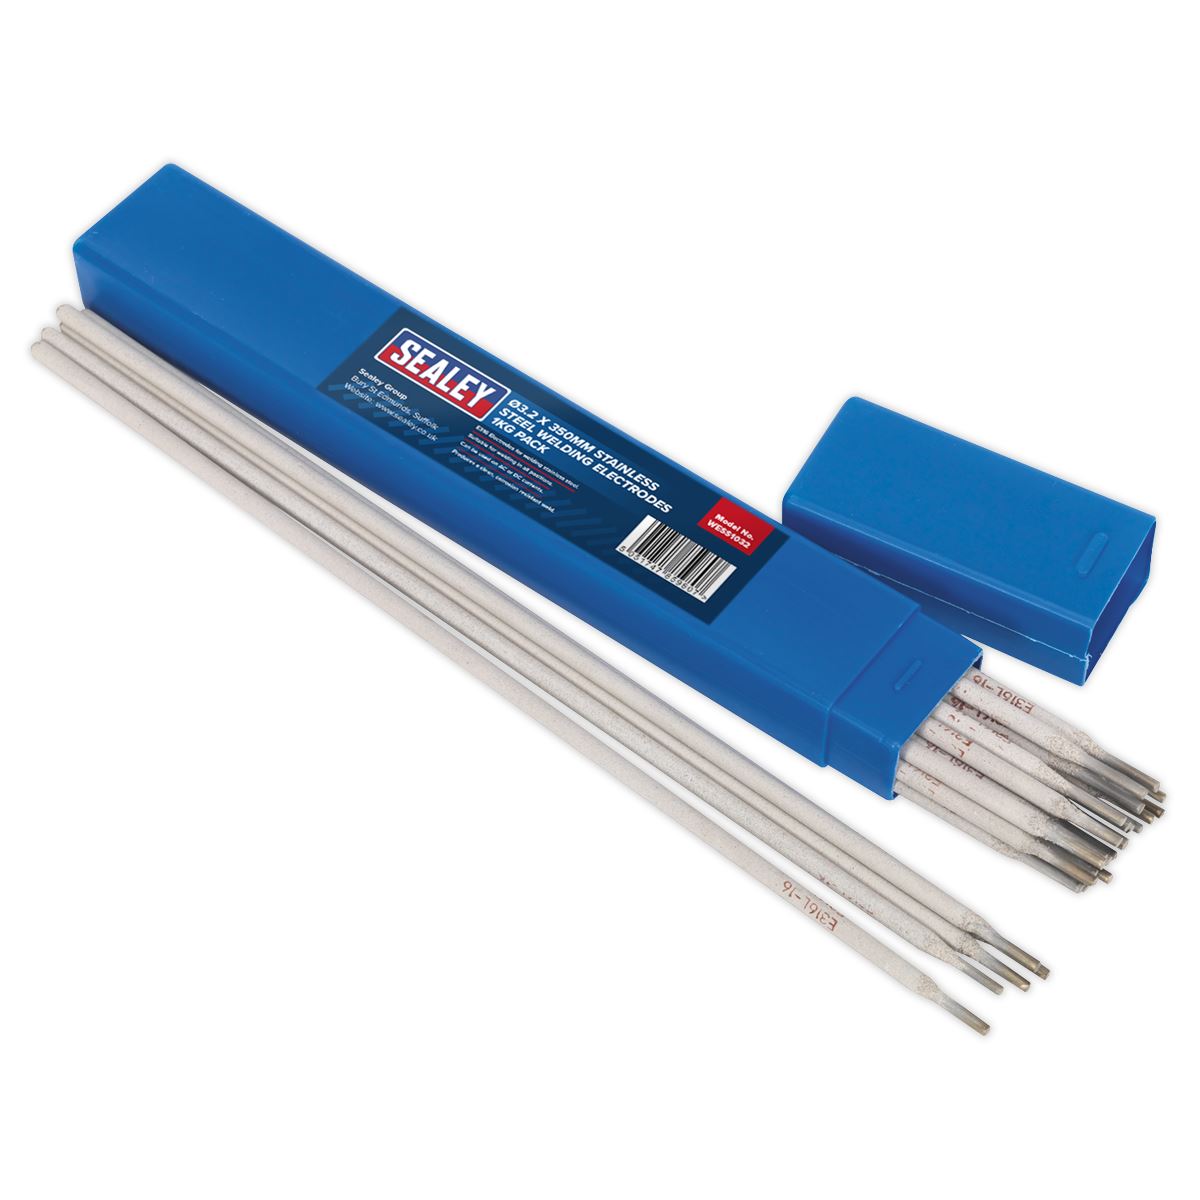 Sealey Welding Electrodes Stainless Steel Ø3.2 x 350mm 1kg Pack